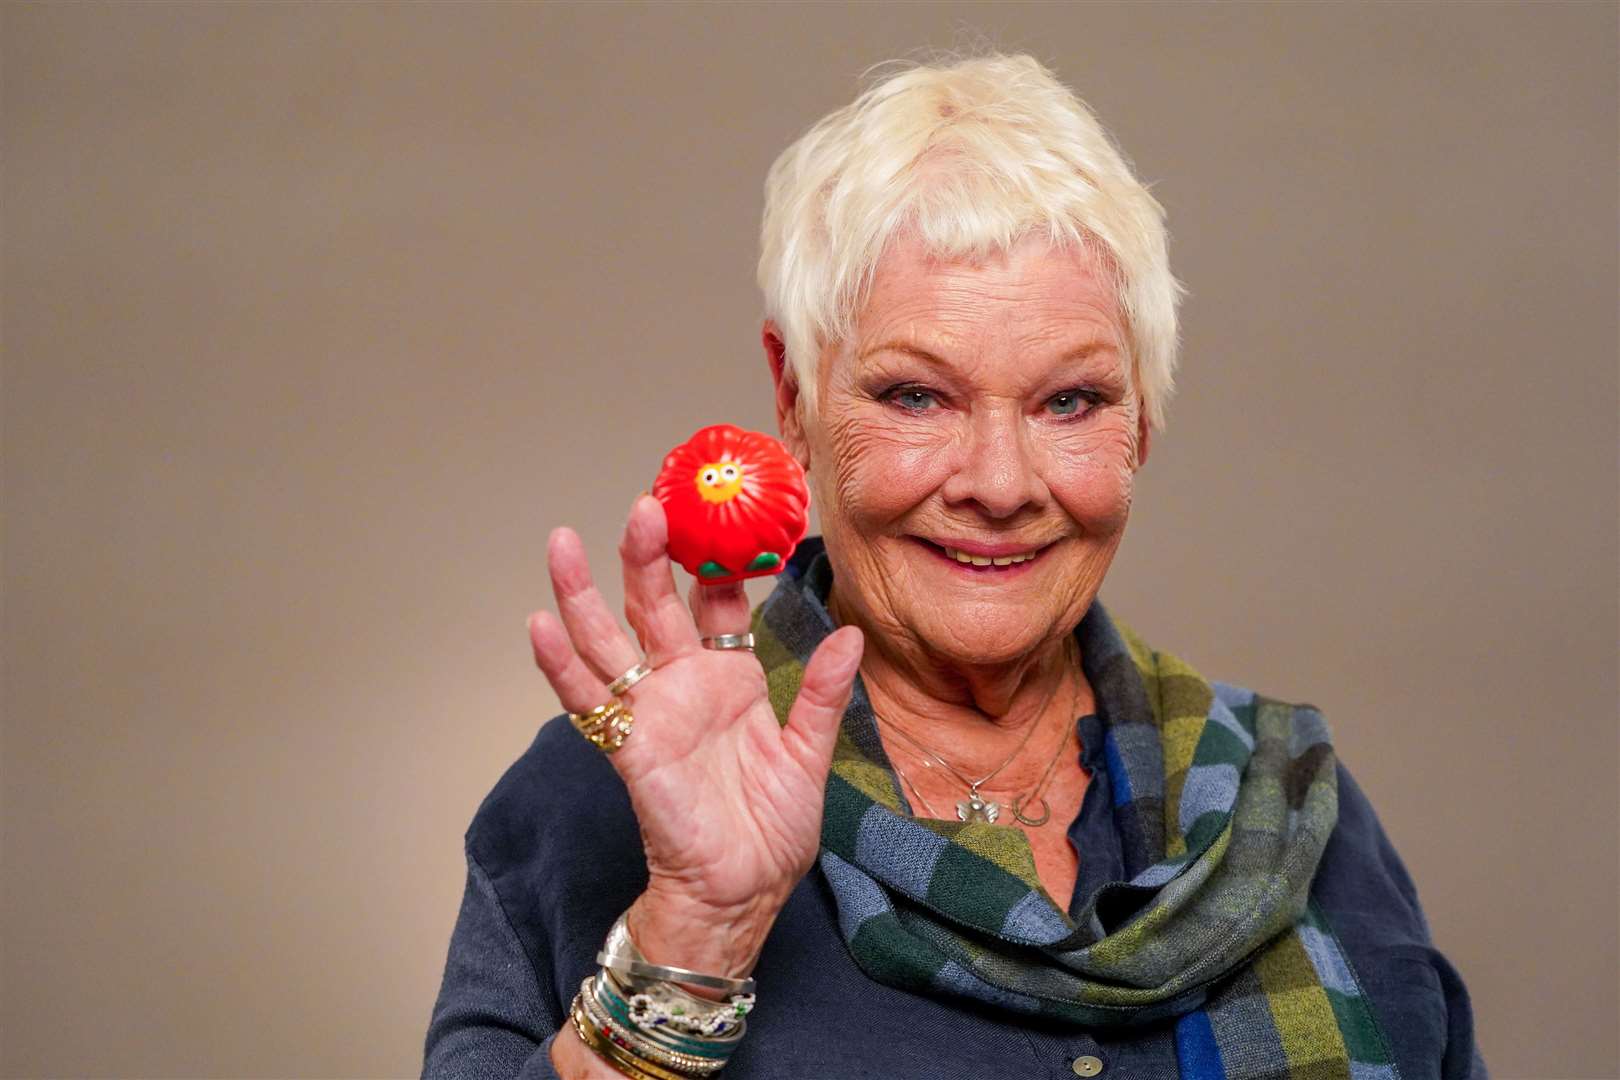 Dame Judi Dench pictured with an earlier Red Nose Day design. Image: Comic Relief.